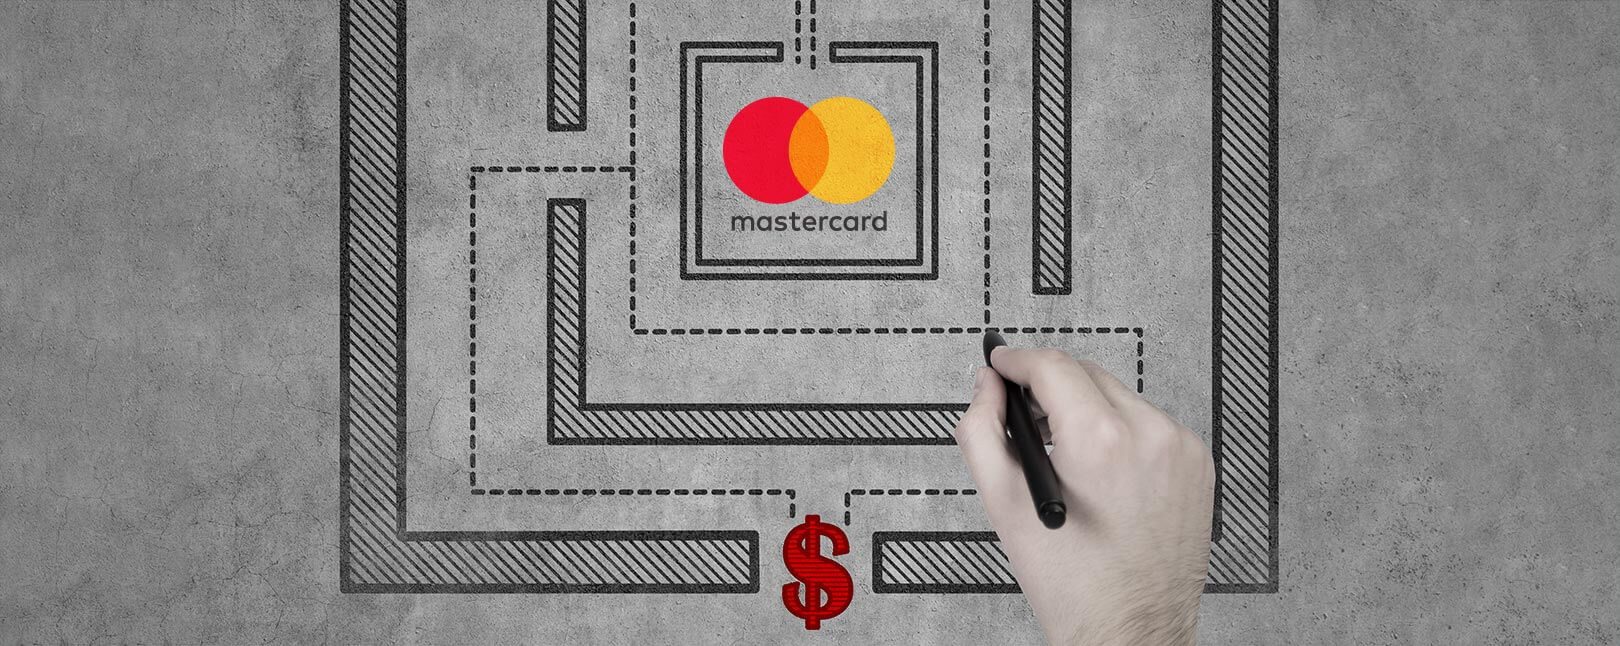 How Mastercard Chargebacks Work: tFees, Time Limits & More